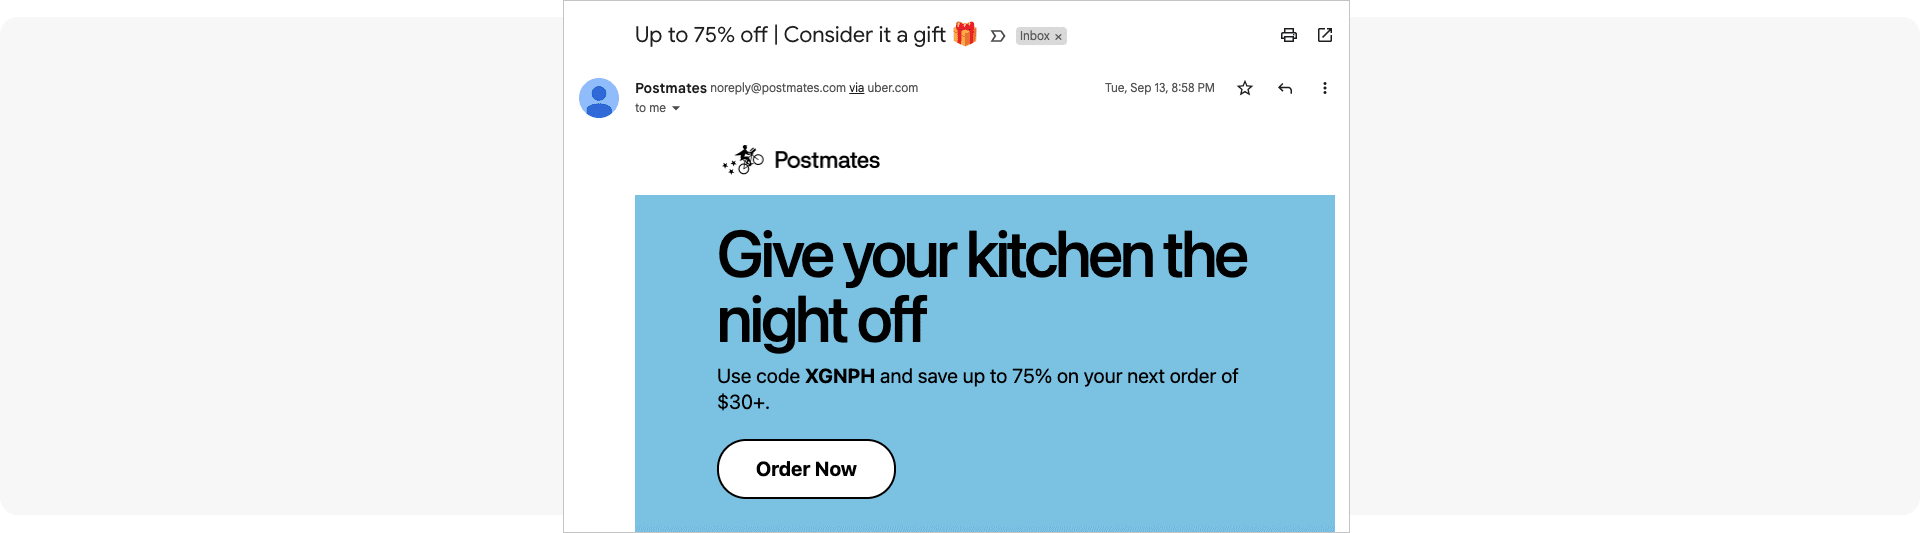 Re-engagement email - Postmates food delivery app